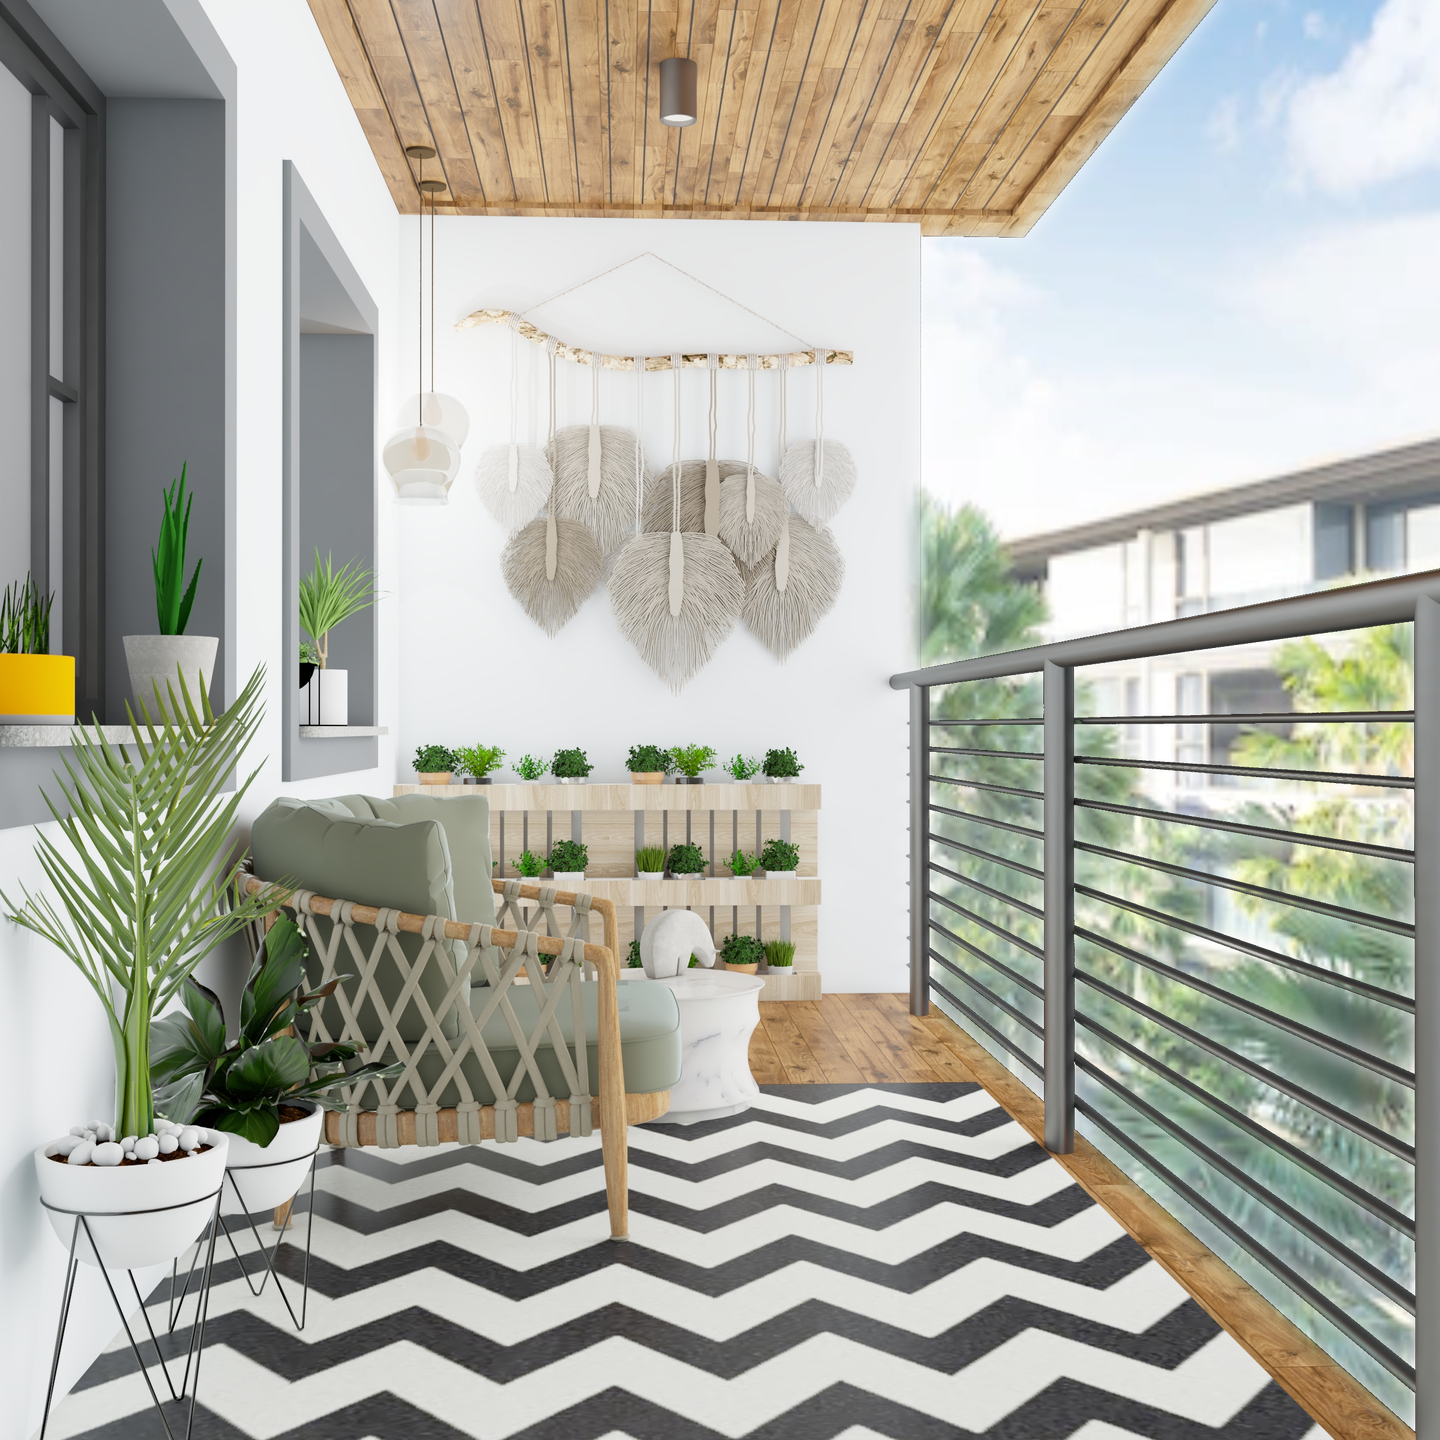 Wooden Flooring and Ceiling Compact Balcony Design with Macrame Art - Livspace